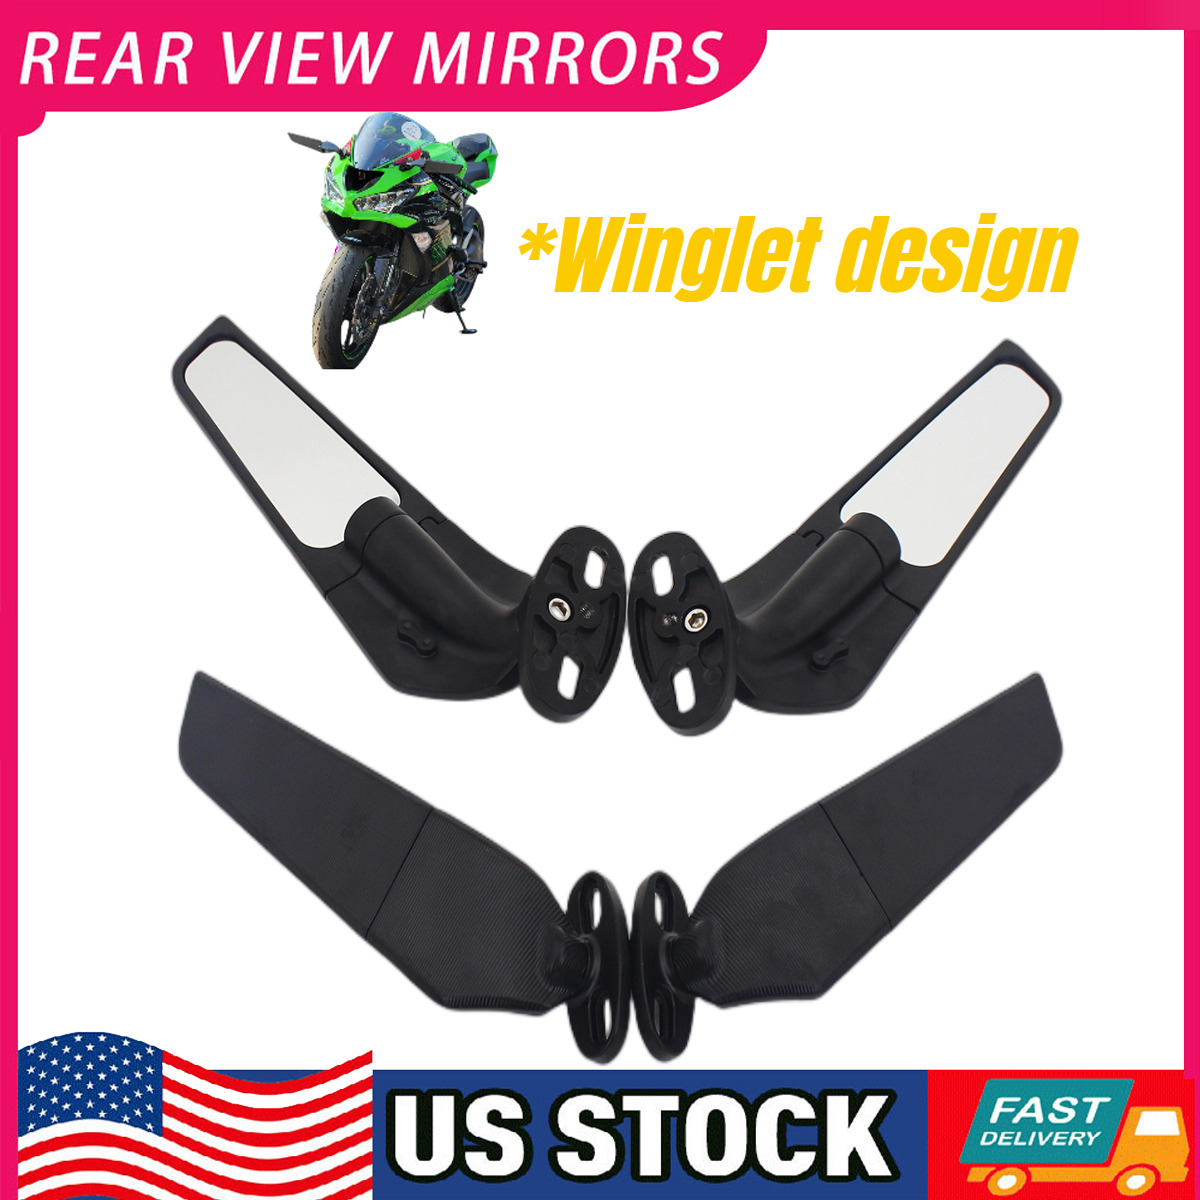 Winglet Stealth Rear View Wind Wing Side Mirrors for Honda 2006 2007 CBR1000RR